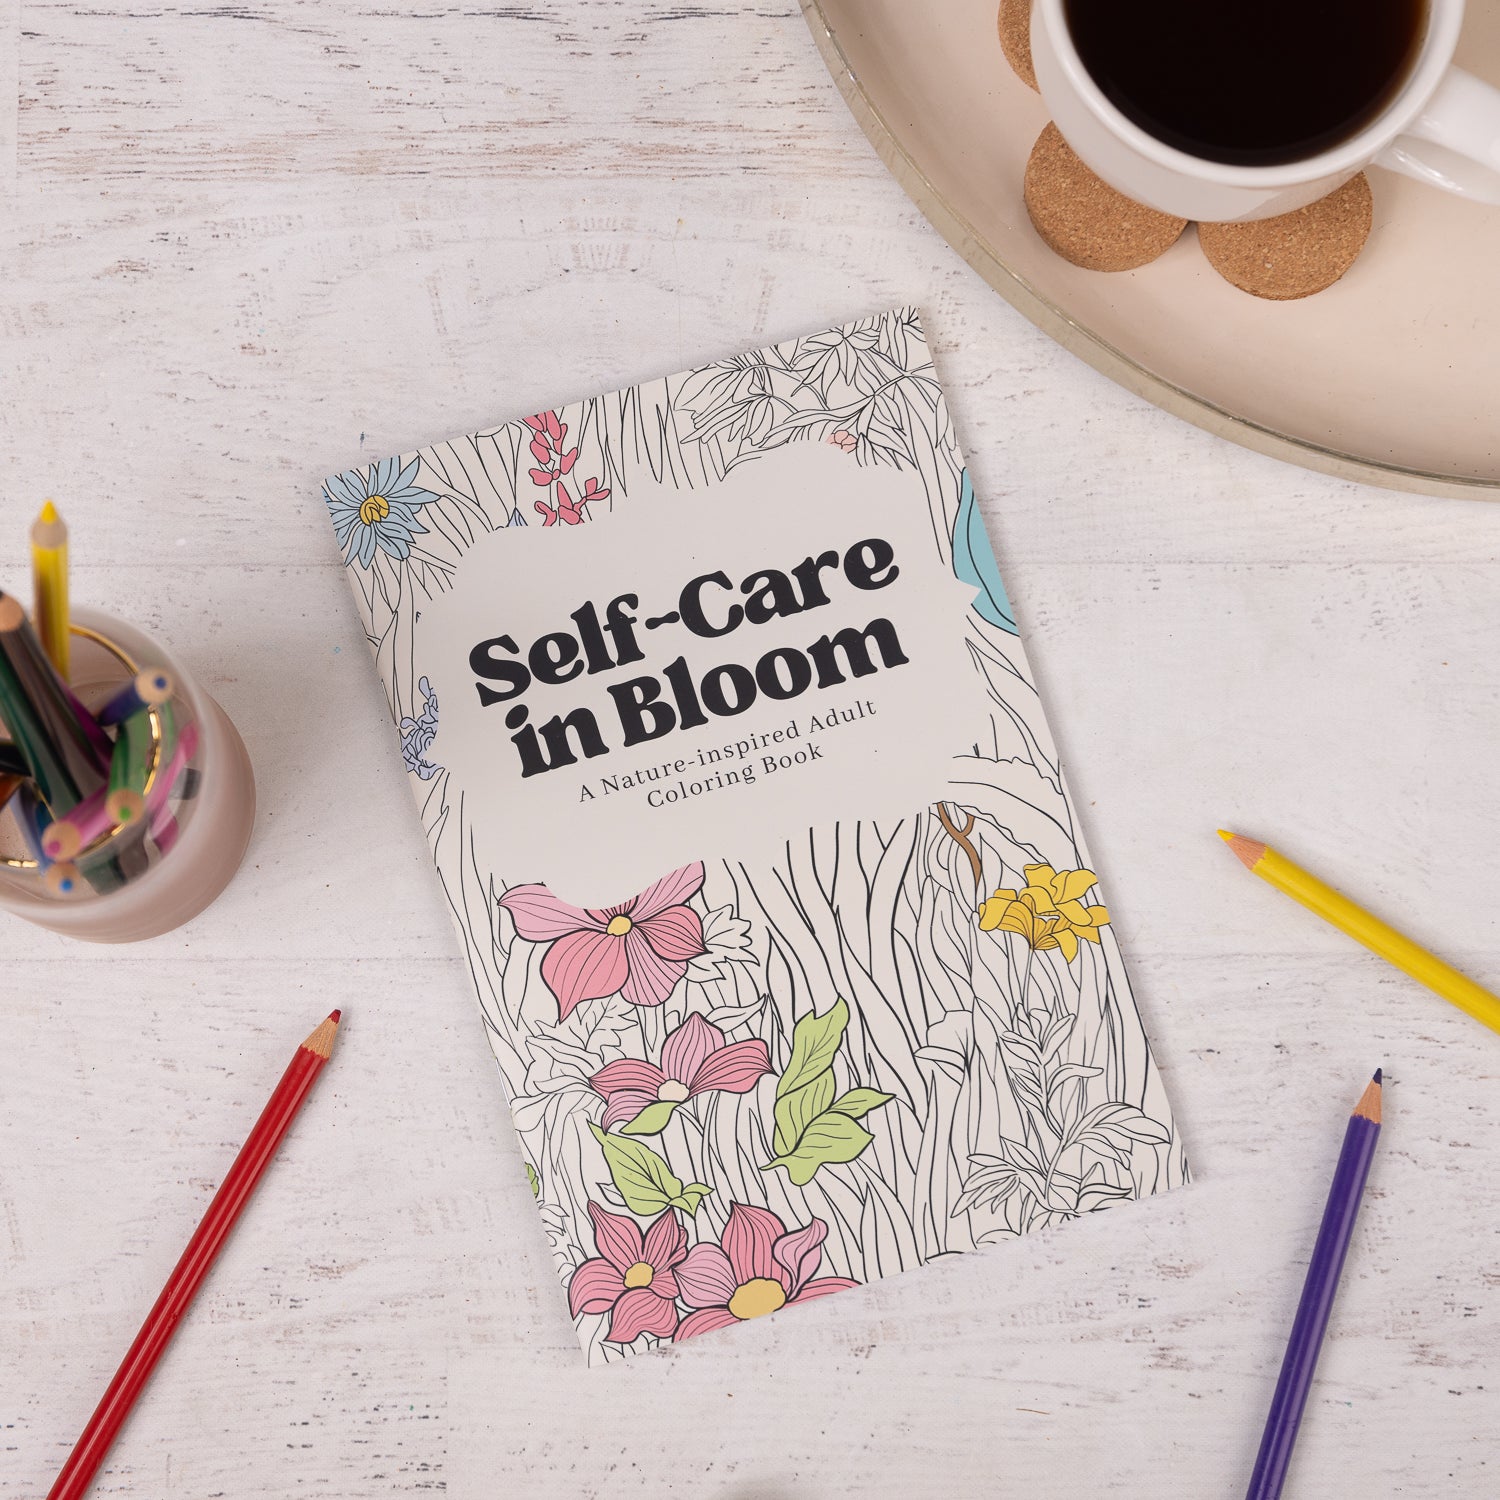 THERABOX: SELF CARE IN BLOOM: A
NATURE-INSPIRED ADULT COLORING BOOK